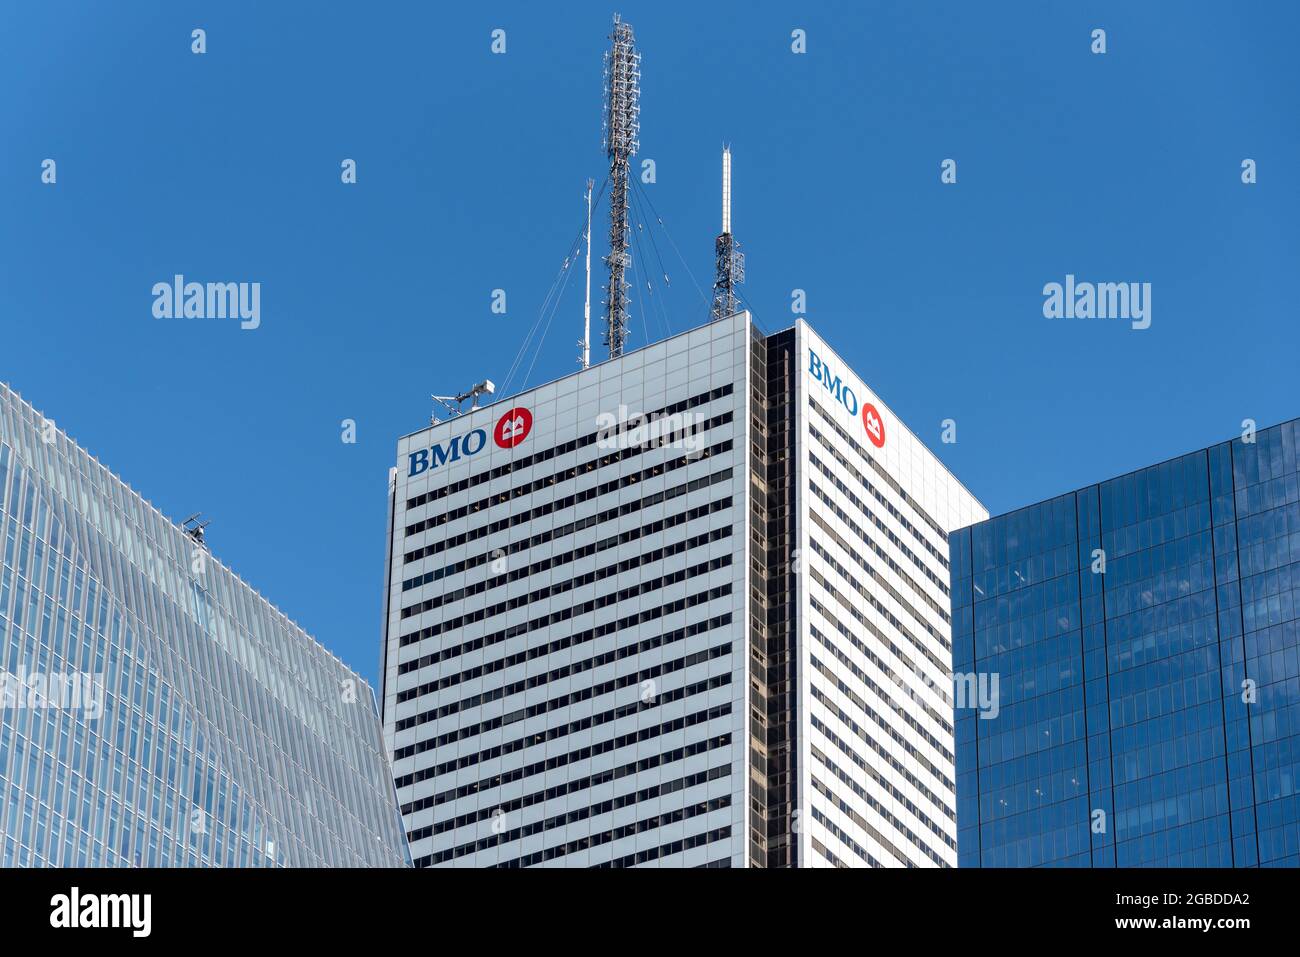 Bank of Montreal or BMO logo on top of a skyscraper tower in the financial district in Toronto, Canada Stock Photo